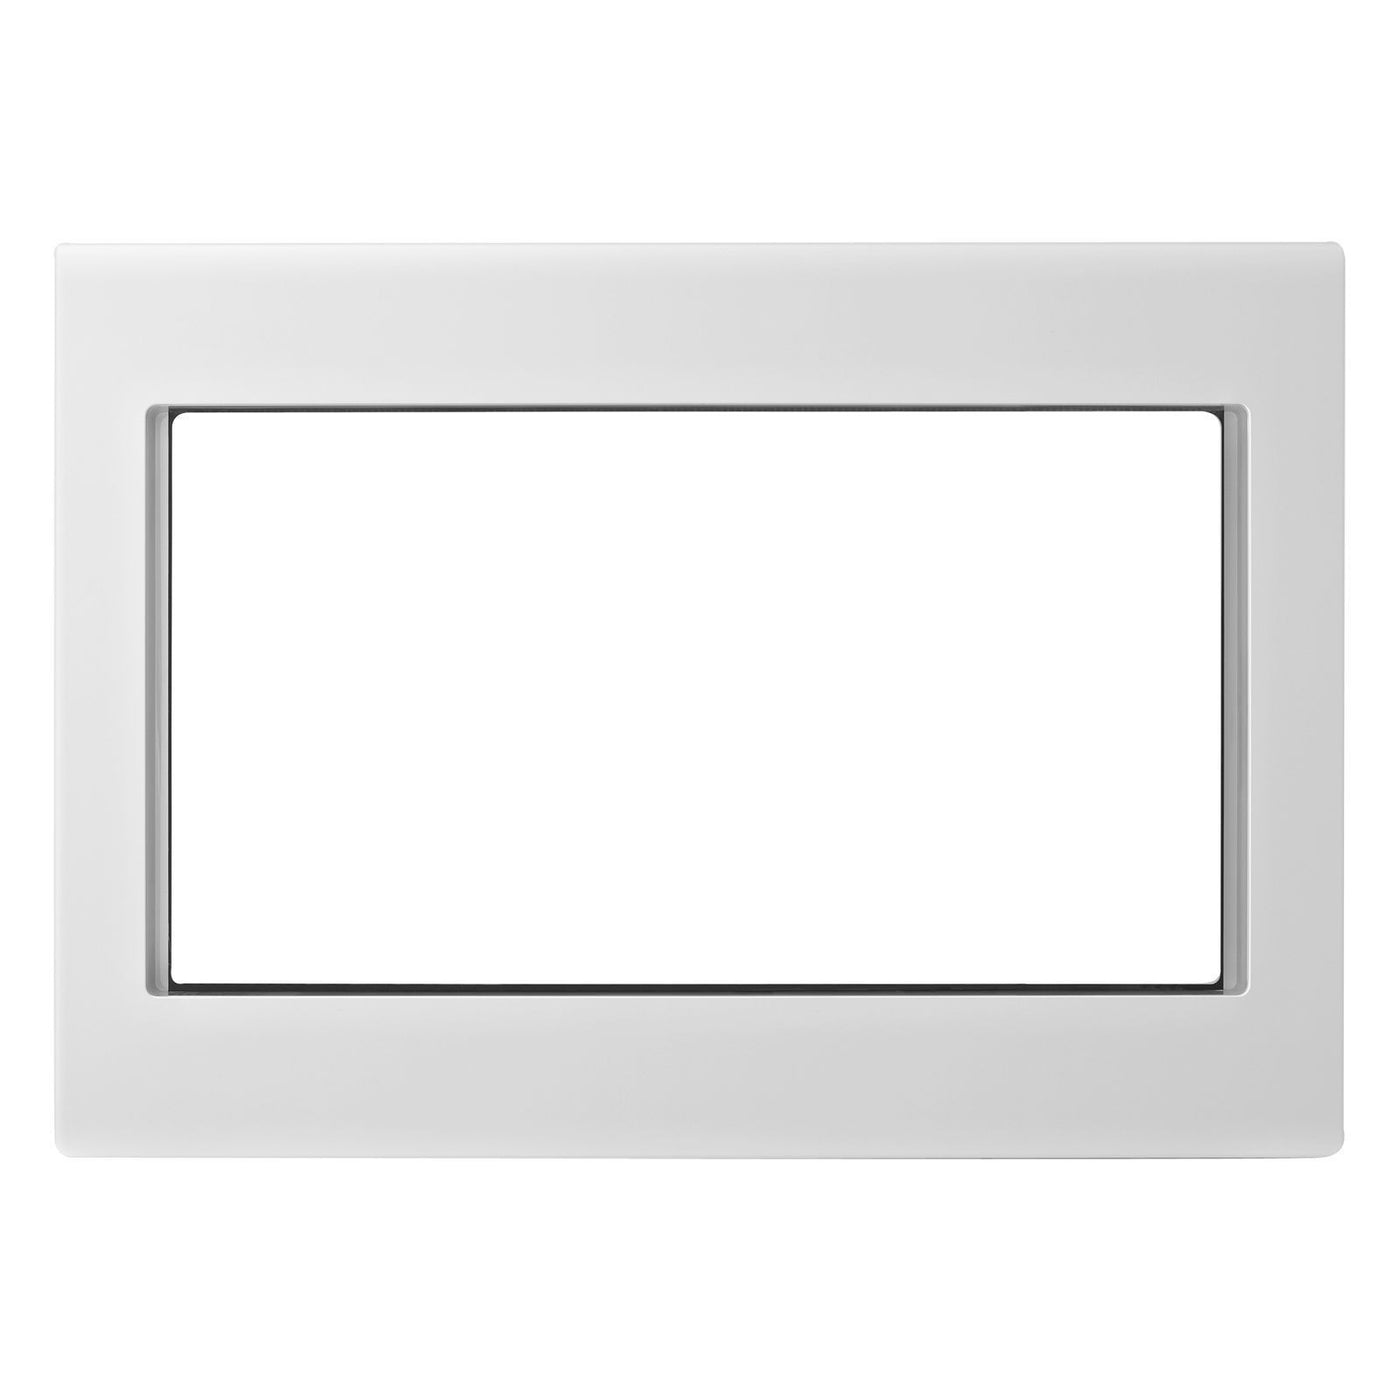 Unbranded White Countertop Microwave Trim Kit (27 inch.) -MK2167AW